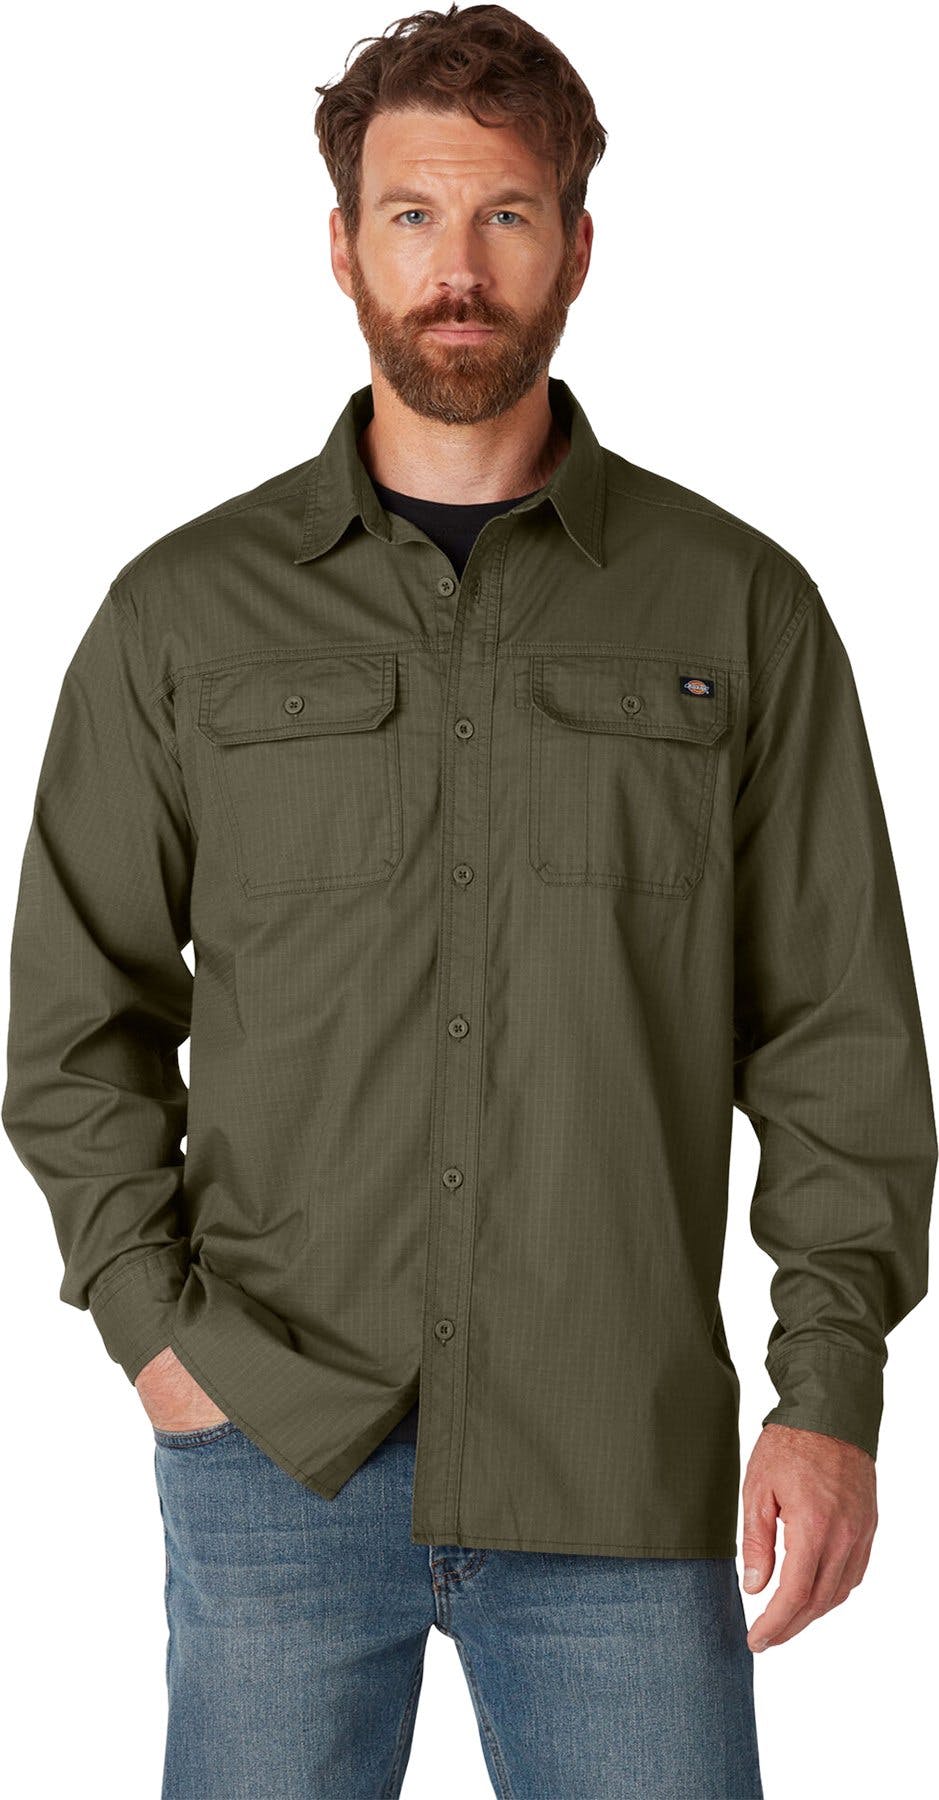 Product image for Flex Ripstop Long Sleeve Shirt - Men's